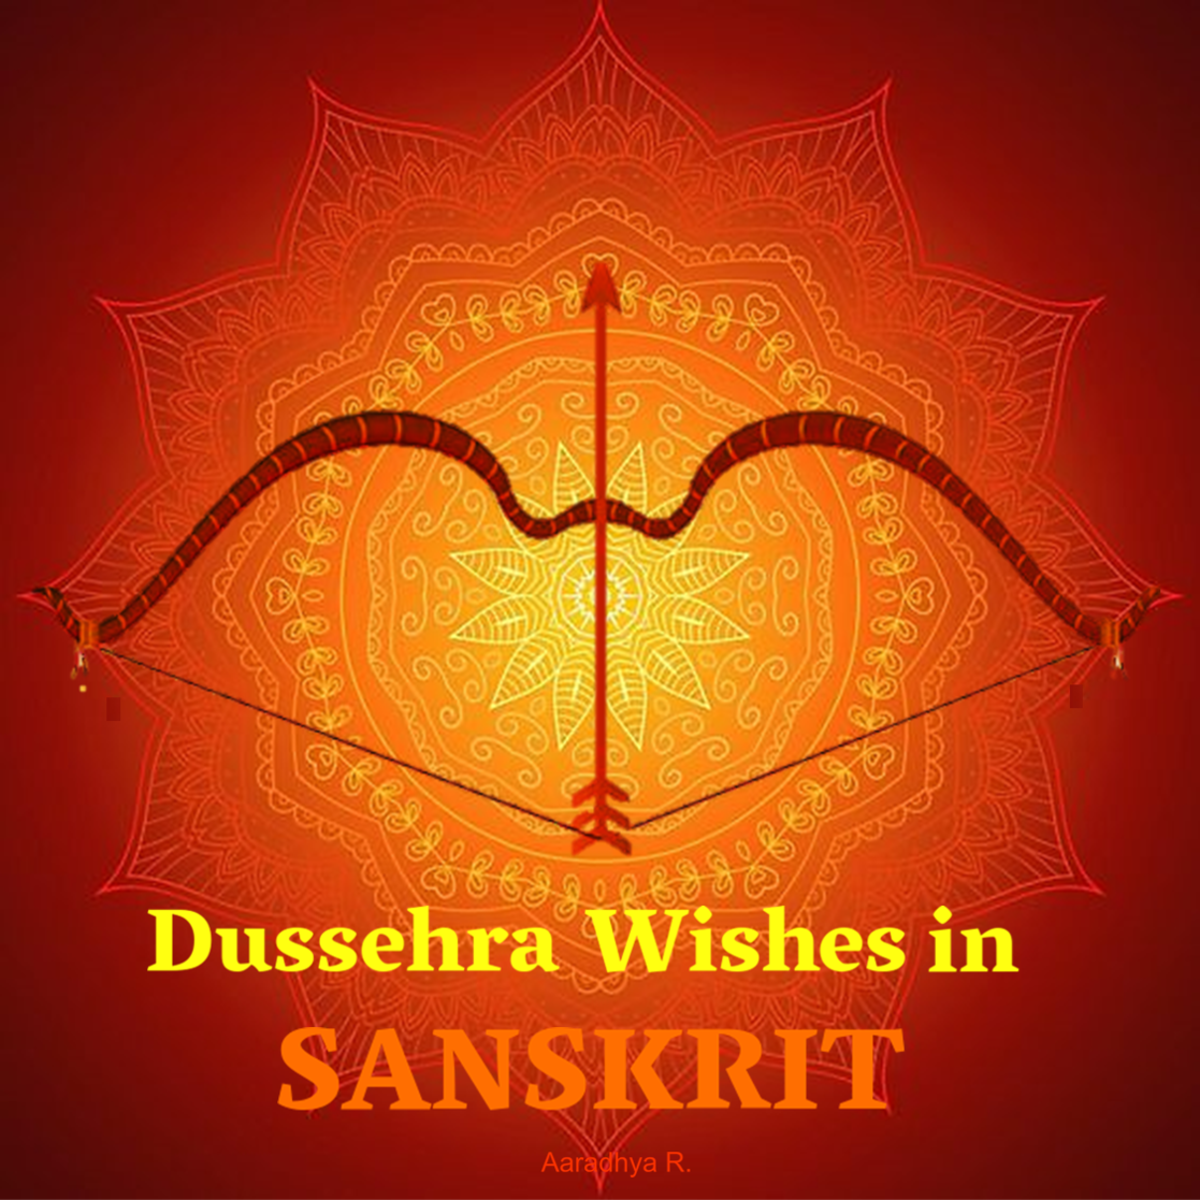 Dussehra (Dasara) Wishes and Greetings in the Sanskrit Language